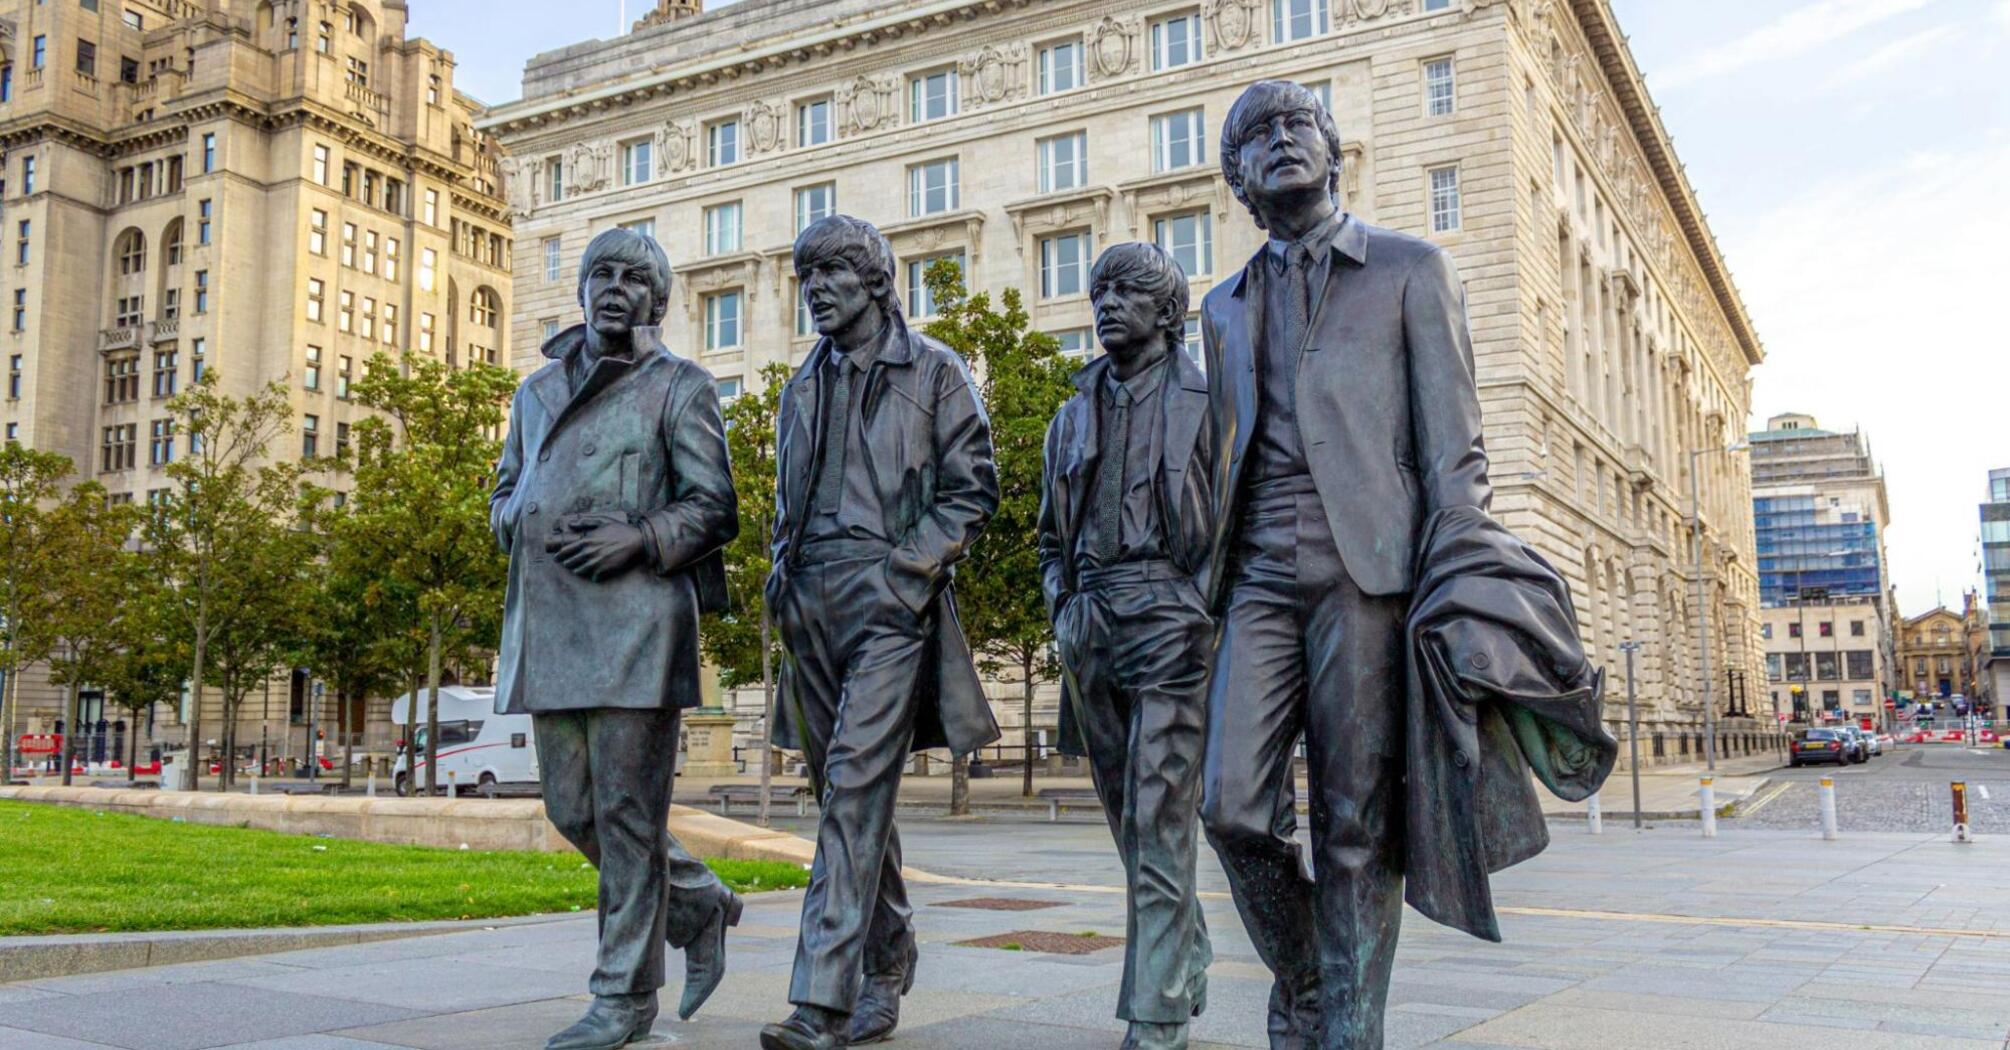 Sculpture of The Beatles in Liverpool